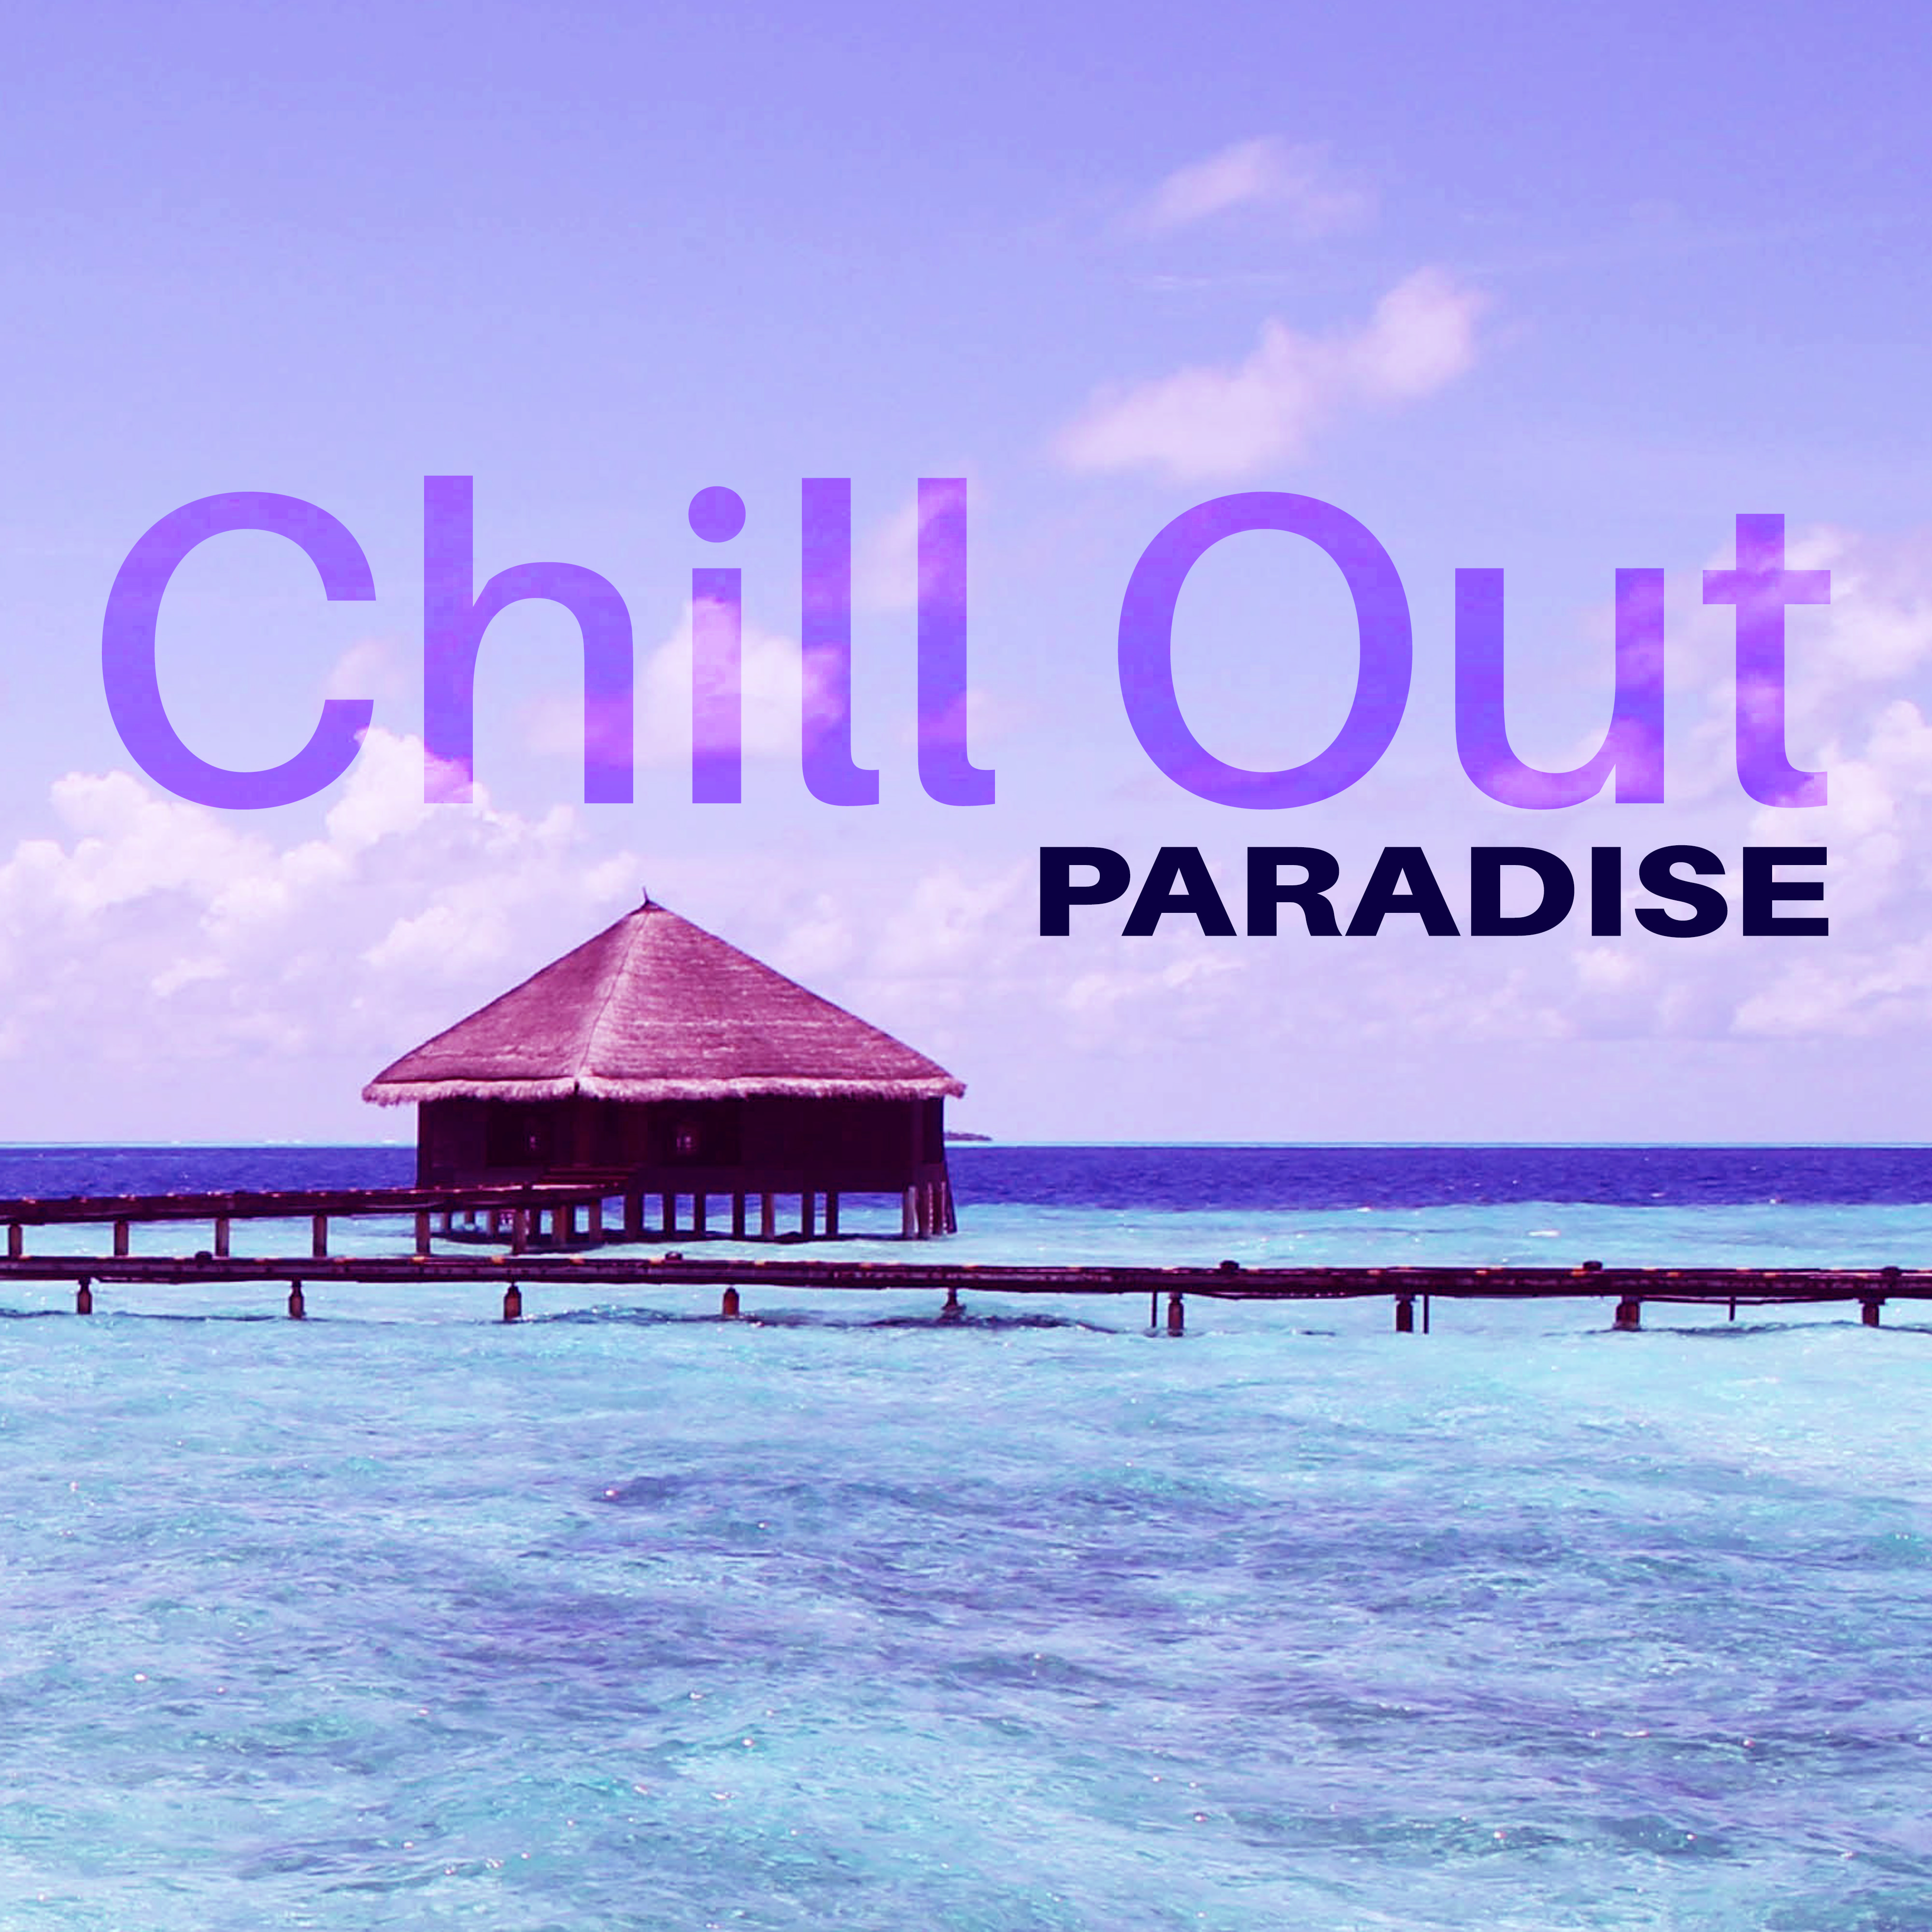 Chill Out Paradise – Drink Bar Music, Chillout, Relax & Chill, Summer Music, Party By the Pool